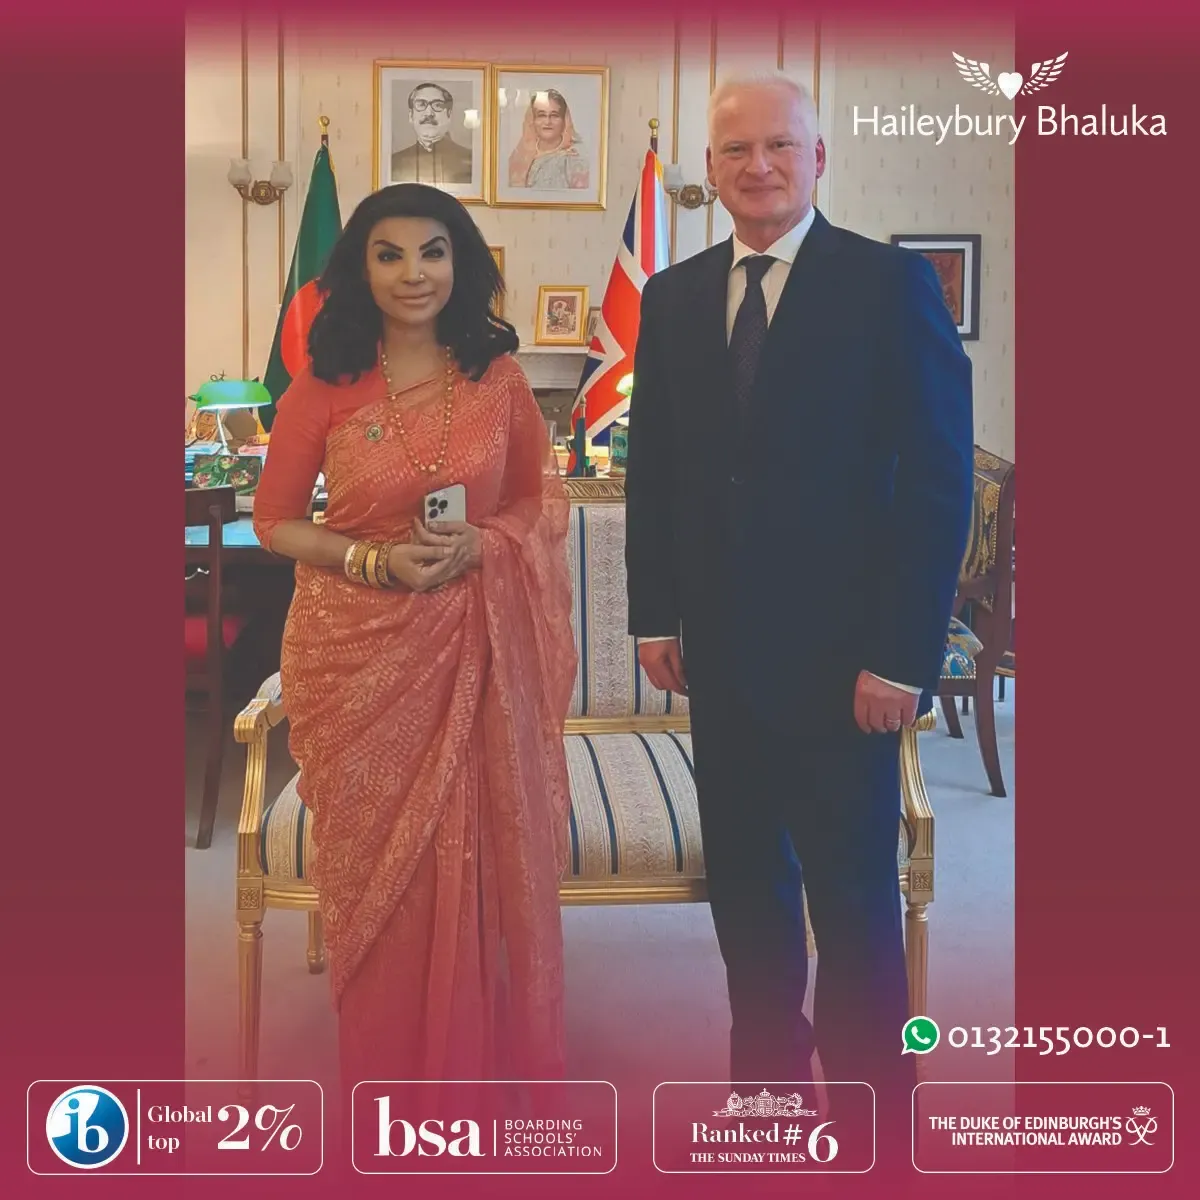 The Founding Headmaster Mr. Simon O'Grady was delighted to meet with H.E. Tasneem, Bangladesh High Commissioner to the UK, at her residence in London, to outline how Haileybury Bhaluka is transforming education in Bangladesh.